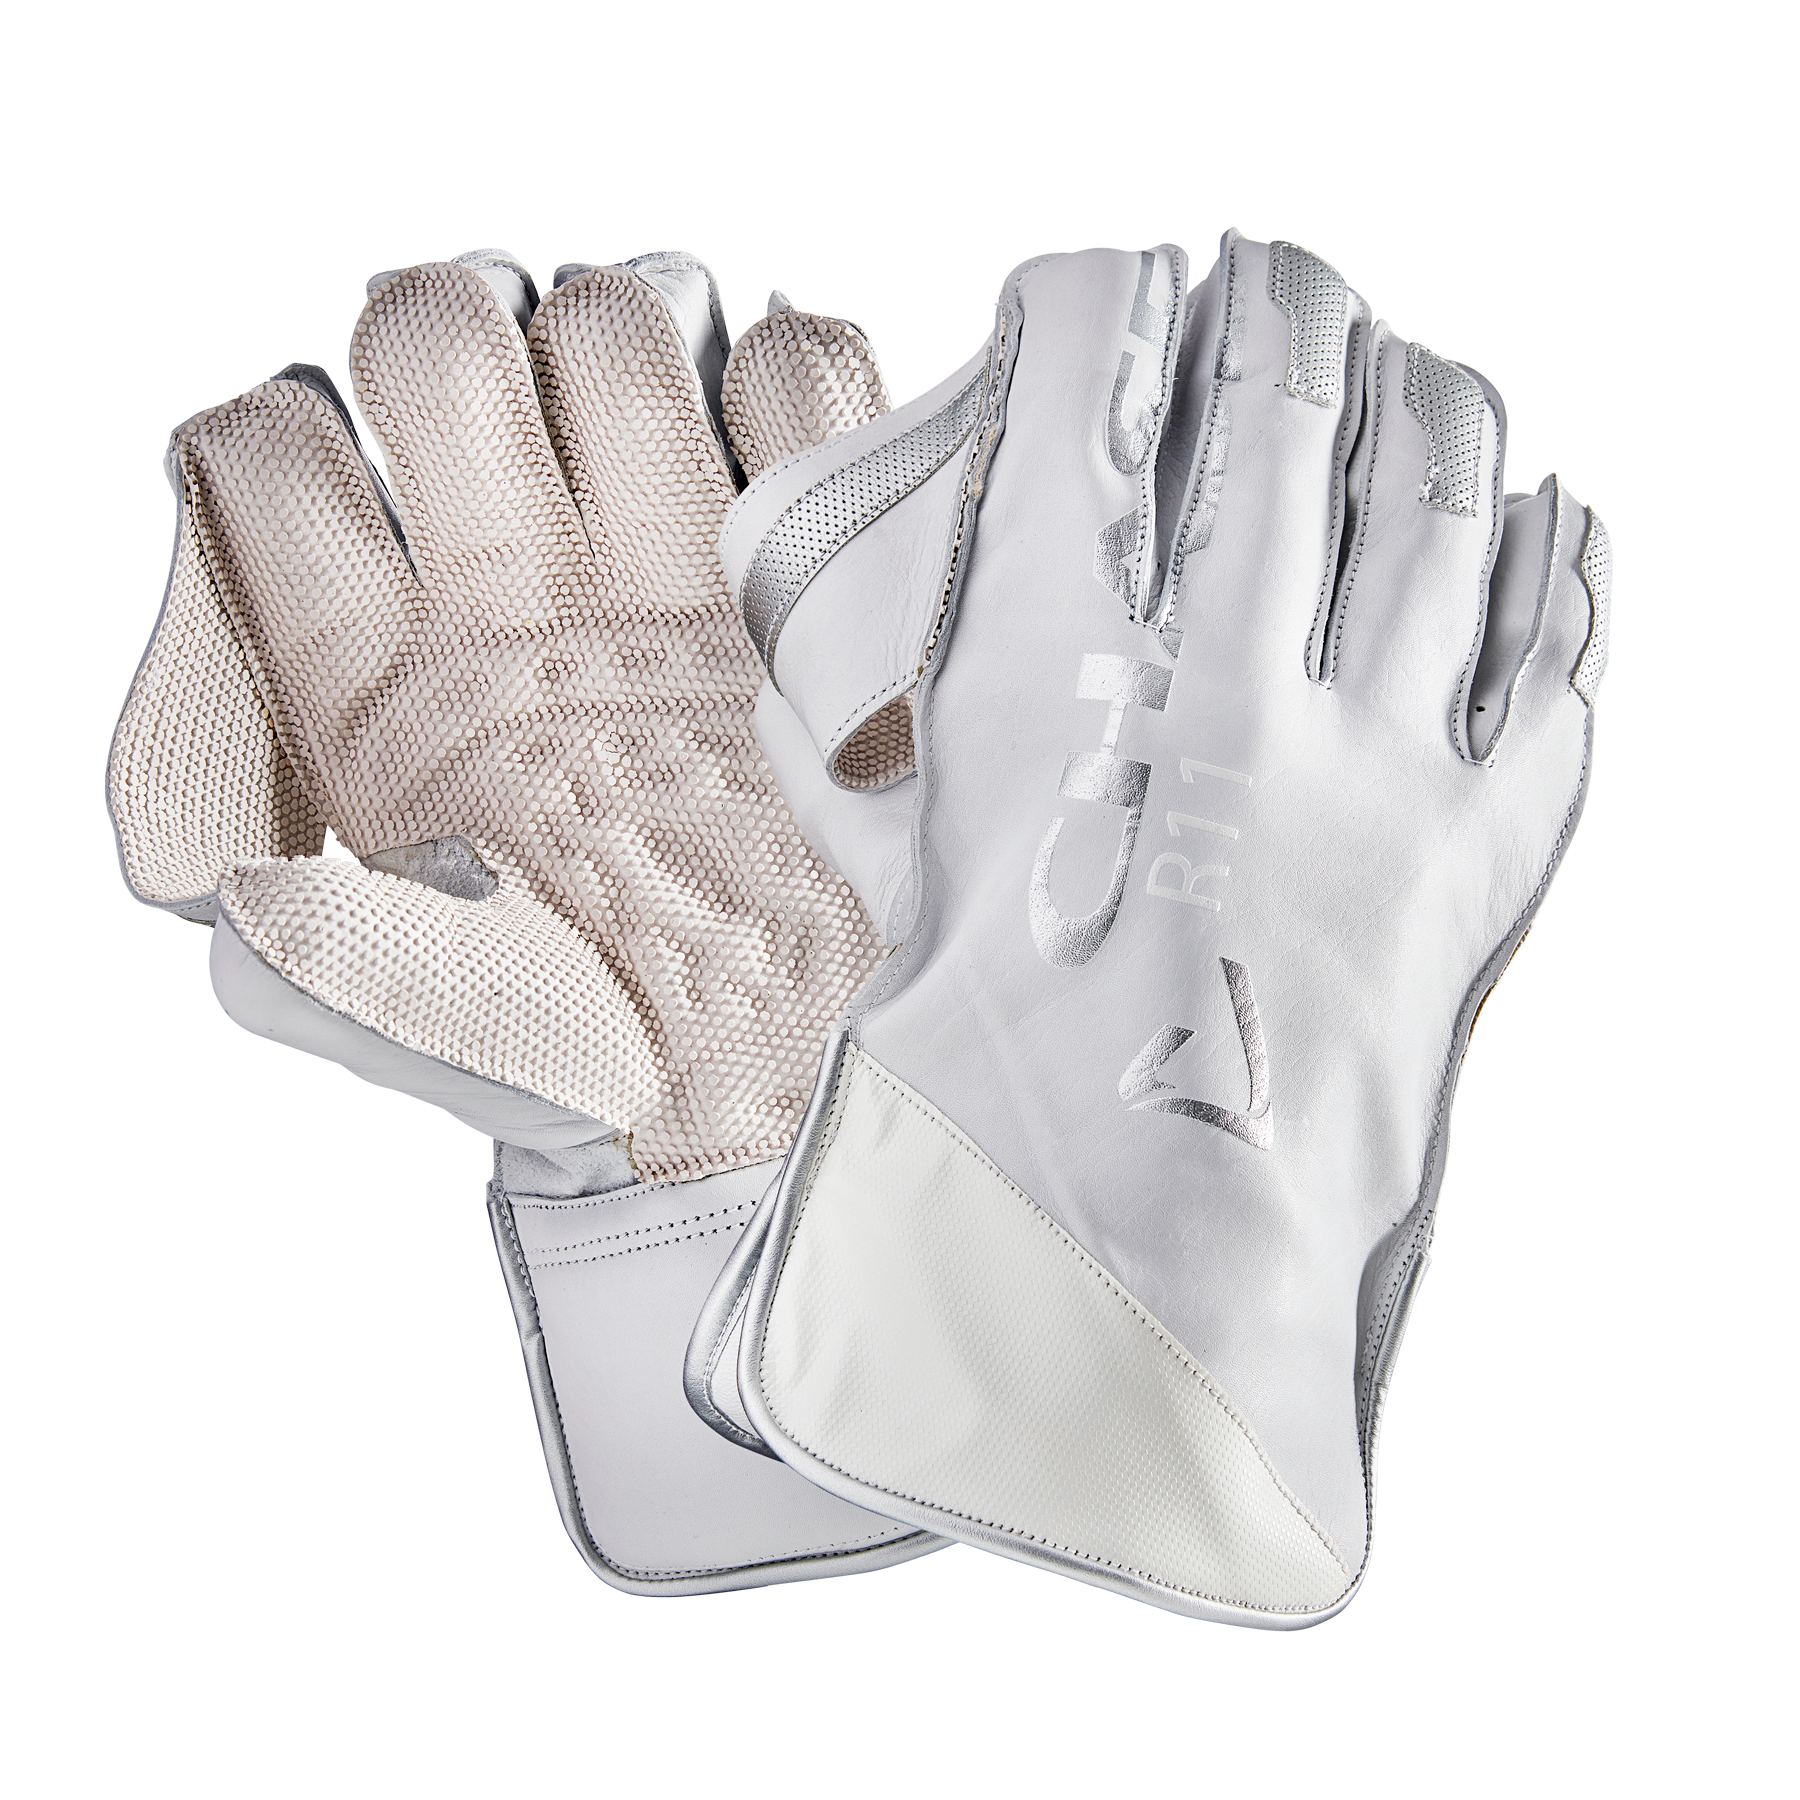 Chase R11 Wicket Keeping Gloves